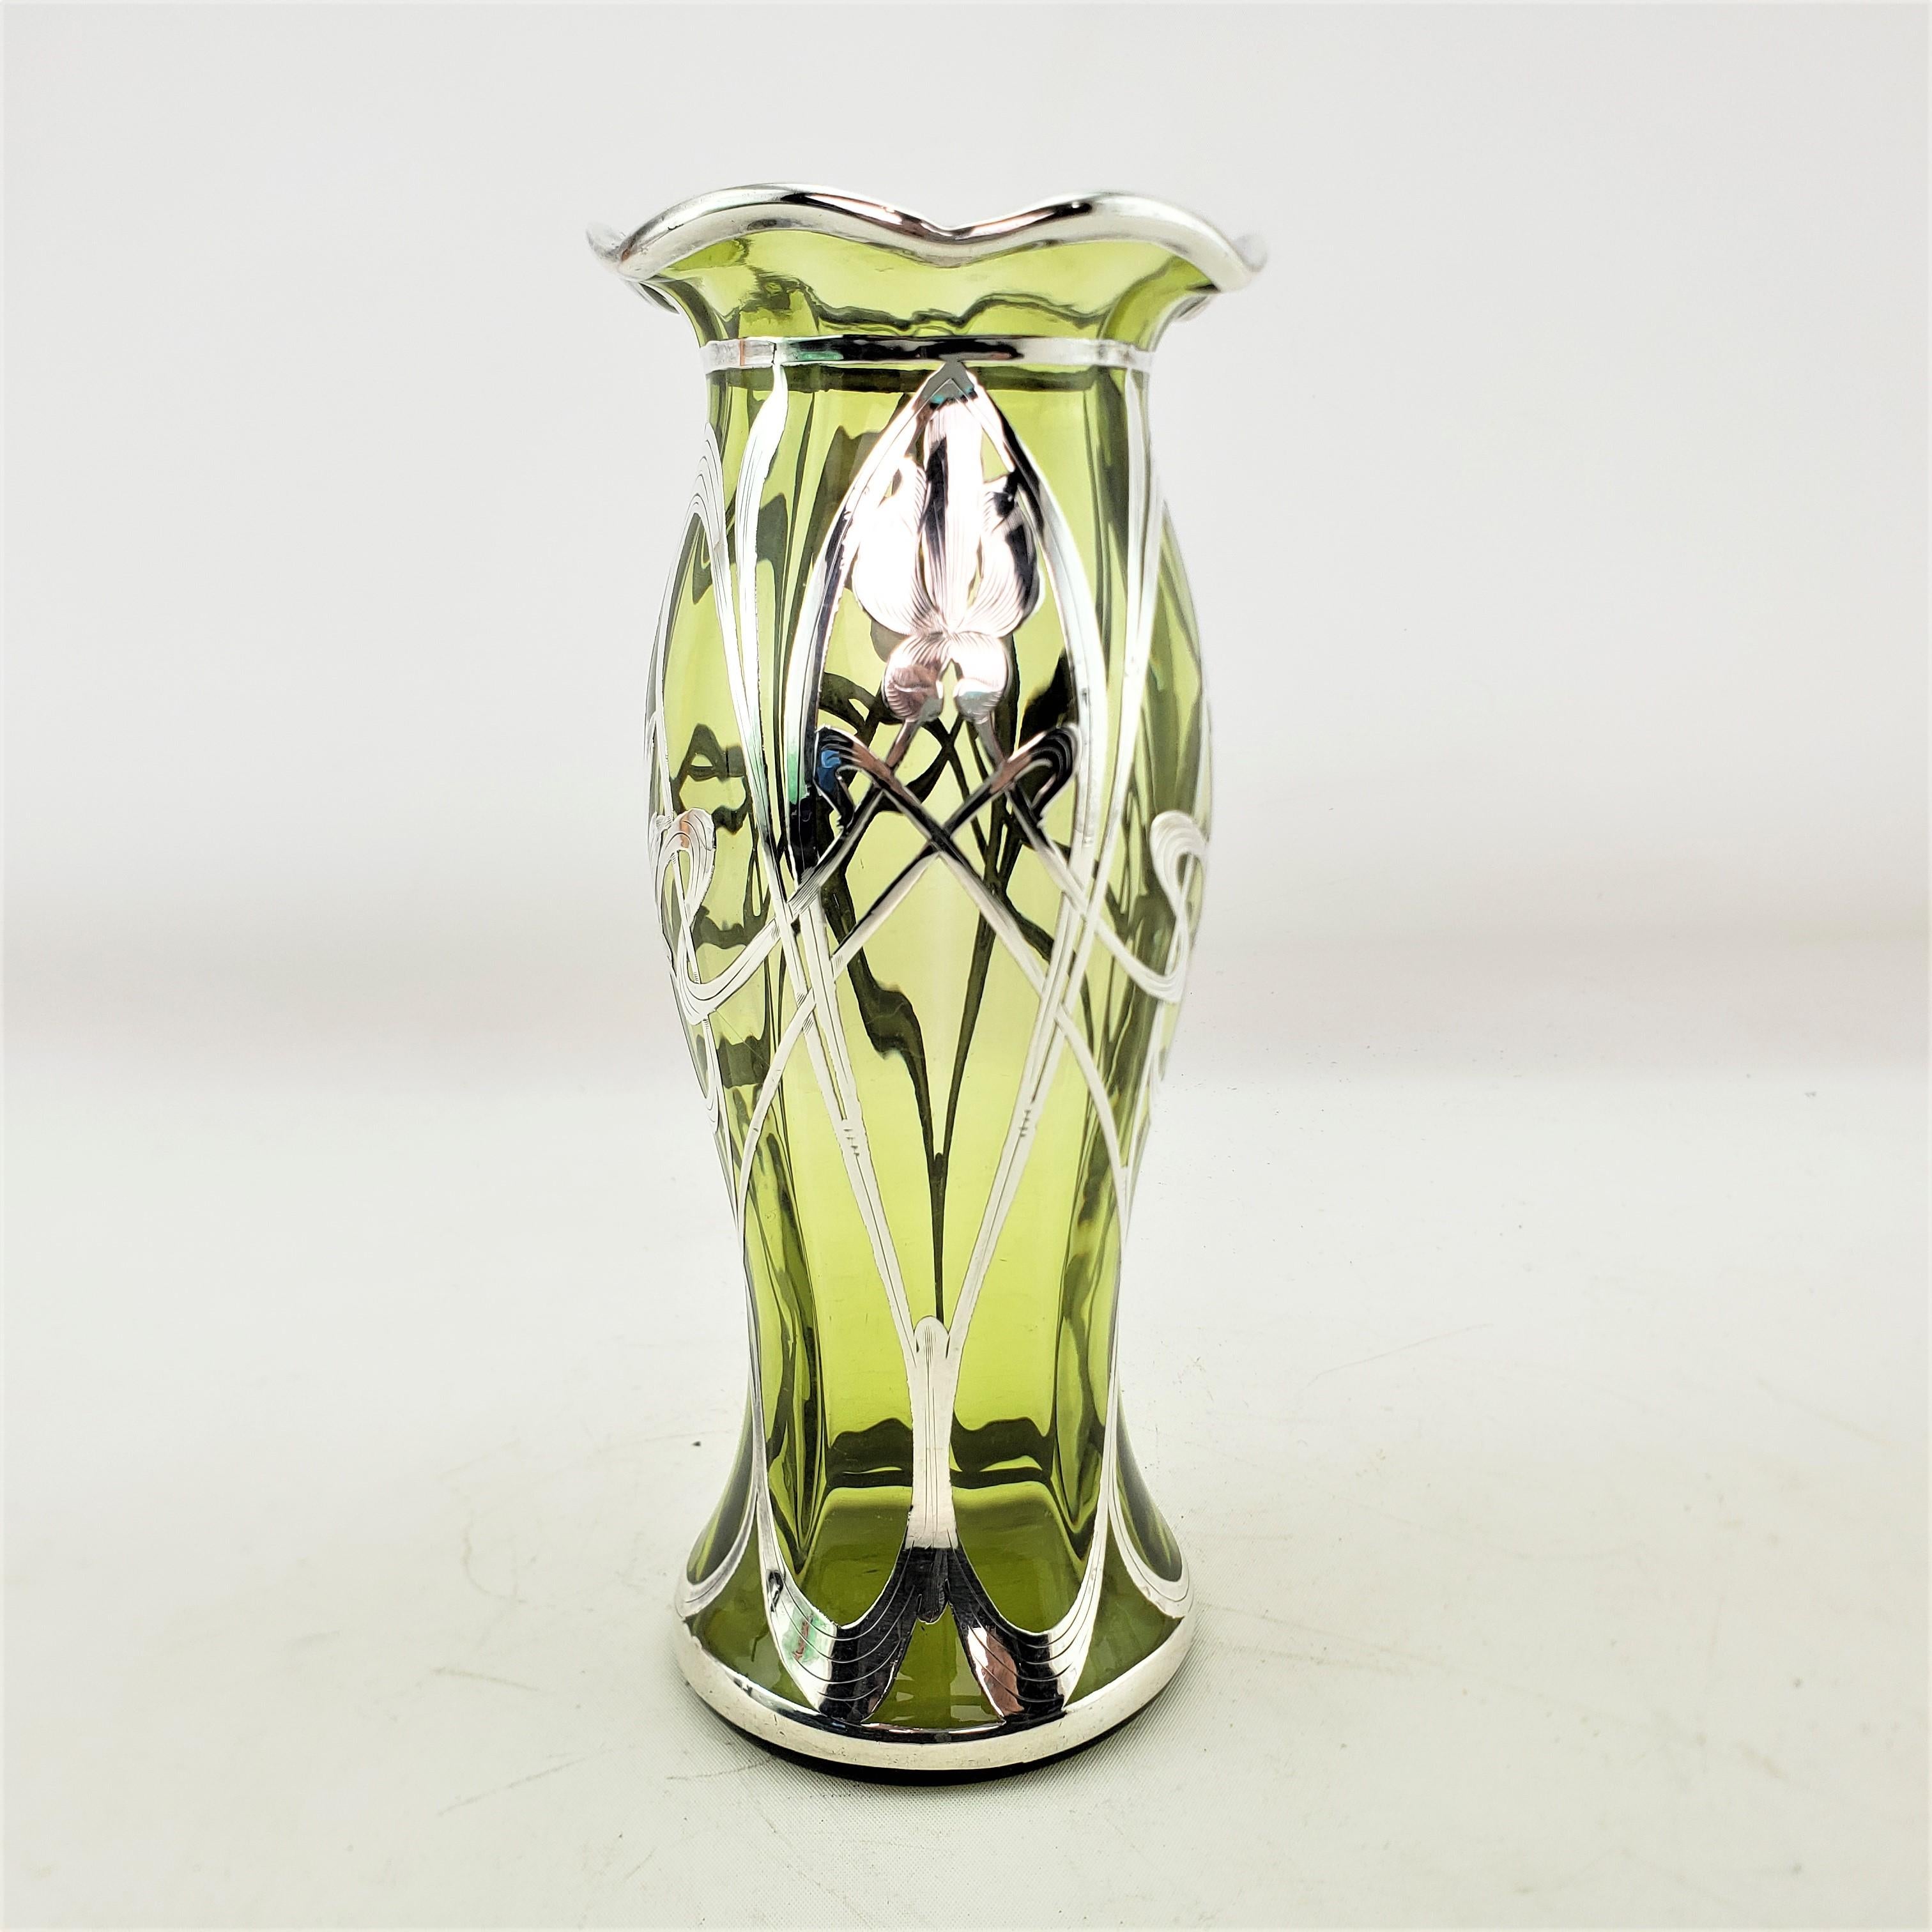 Antique Art Nouveau Sterling Silver Overlay Green Glass Vase with Floral Motif For Sale 2